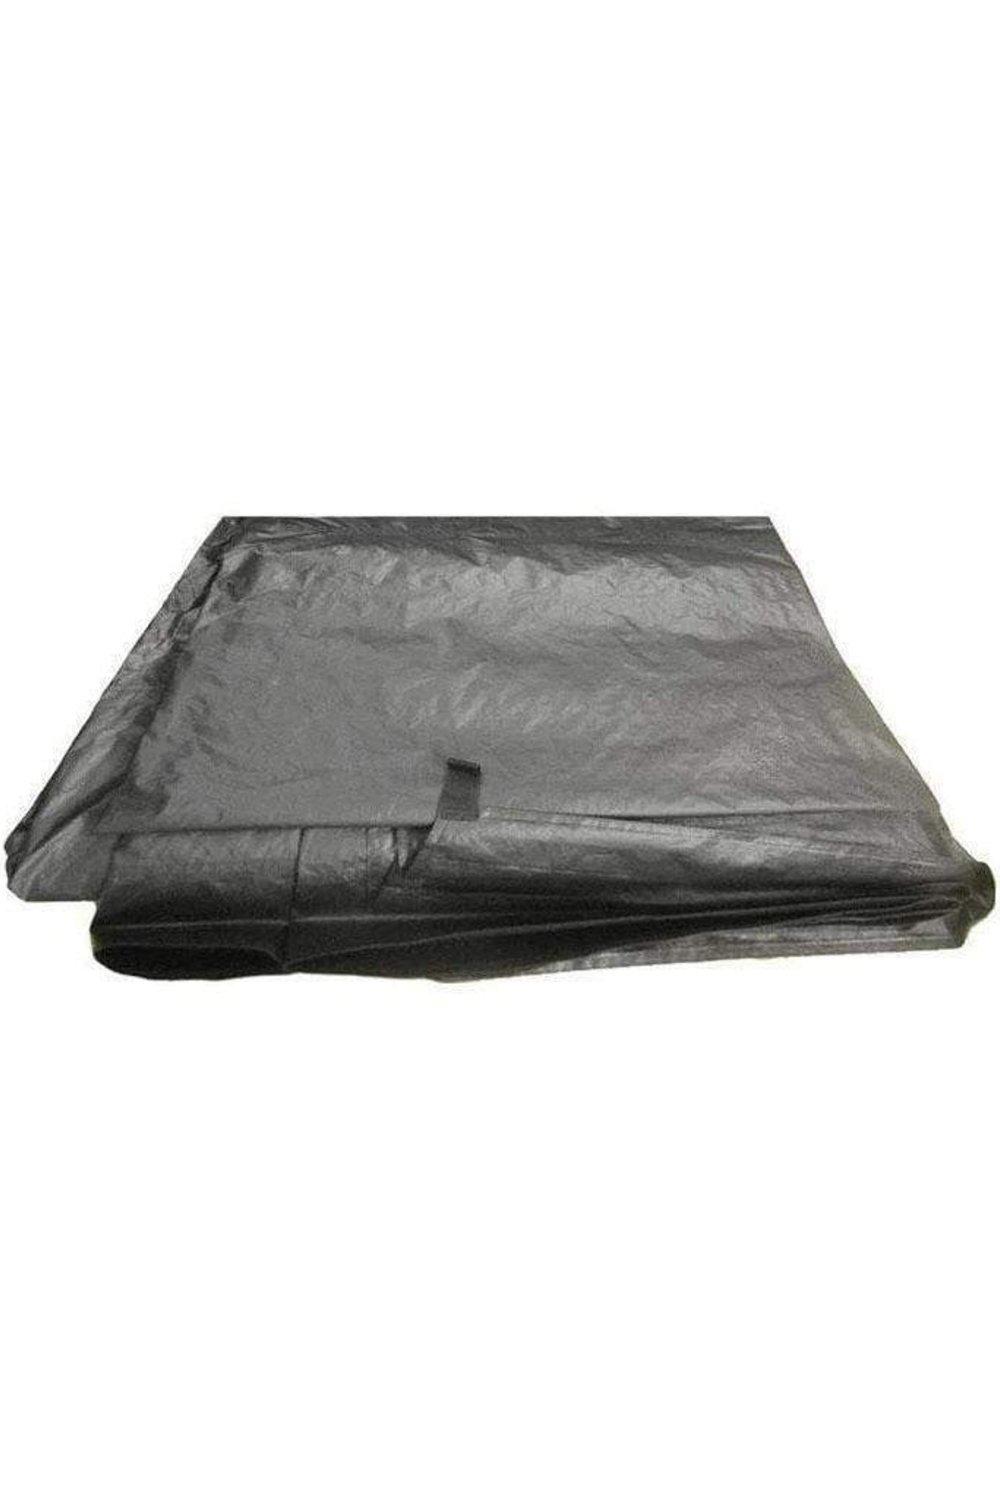 Cubo / Cubo Breeze - Footprint Groundsheet (with Pegs)